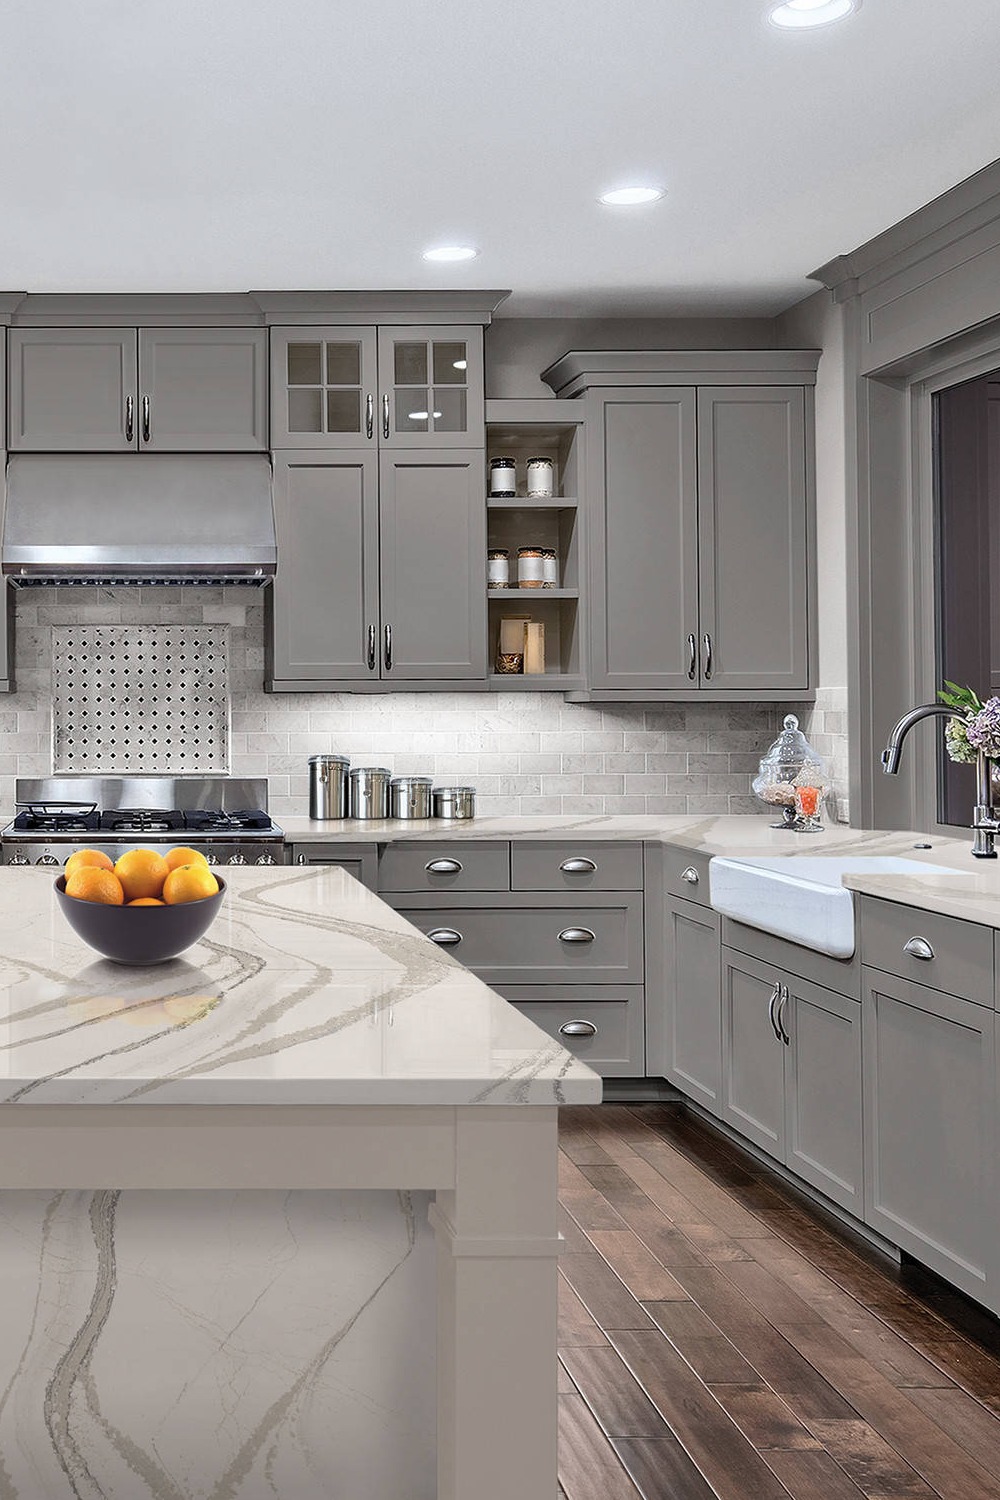 Light Gray Cabinets And White Subway Tile Backsplash Gray And White Kitchen Cabinet Shaker Style White Countertop Base Cabinets